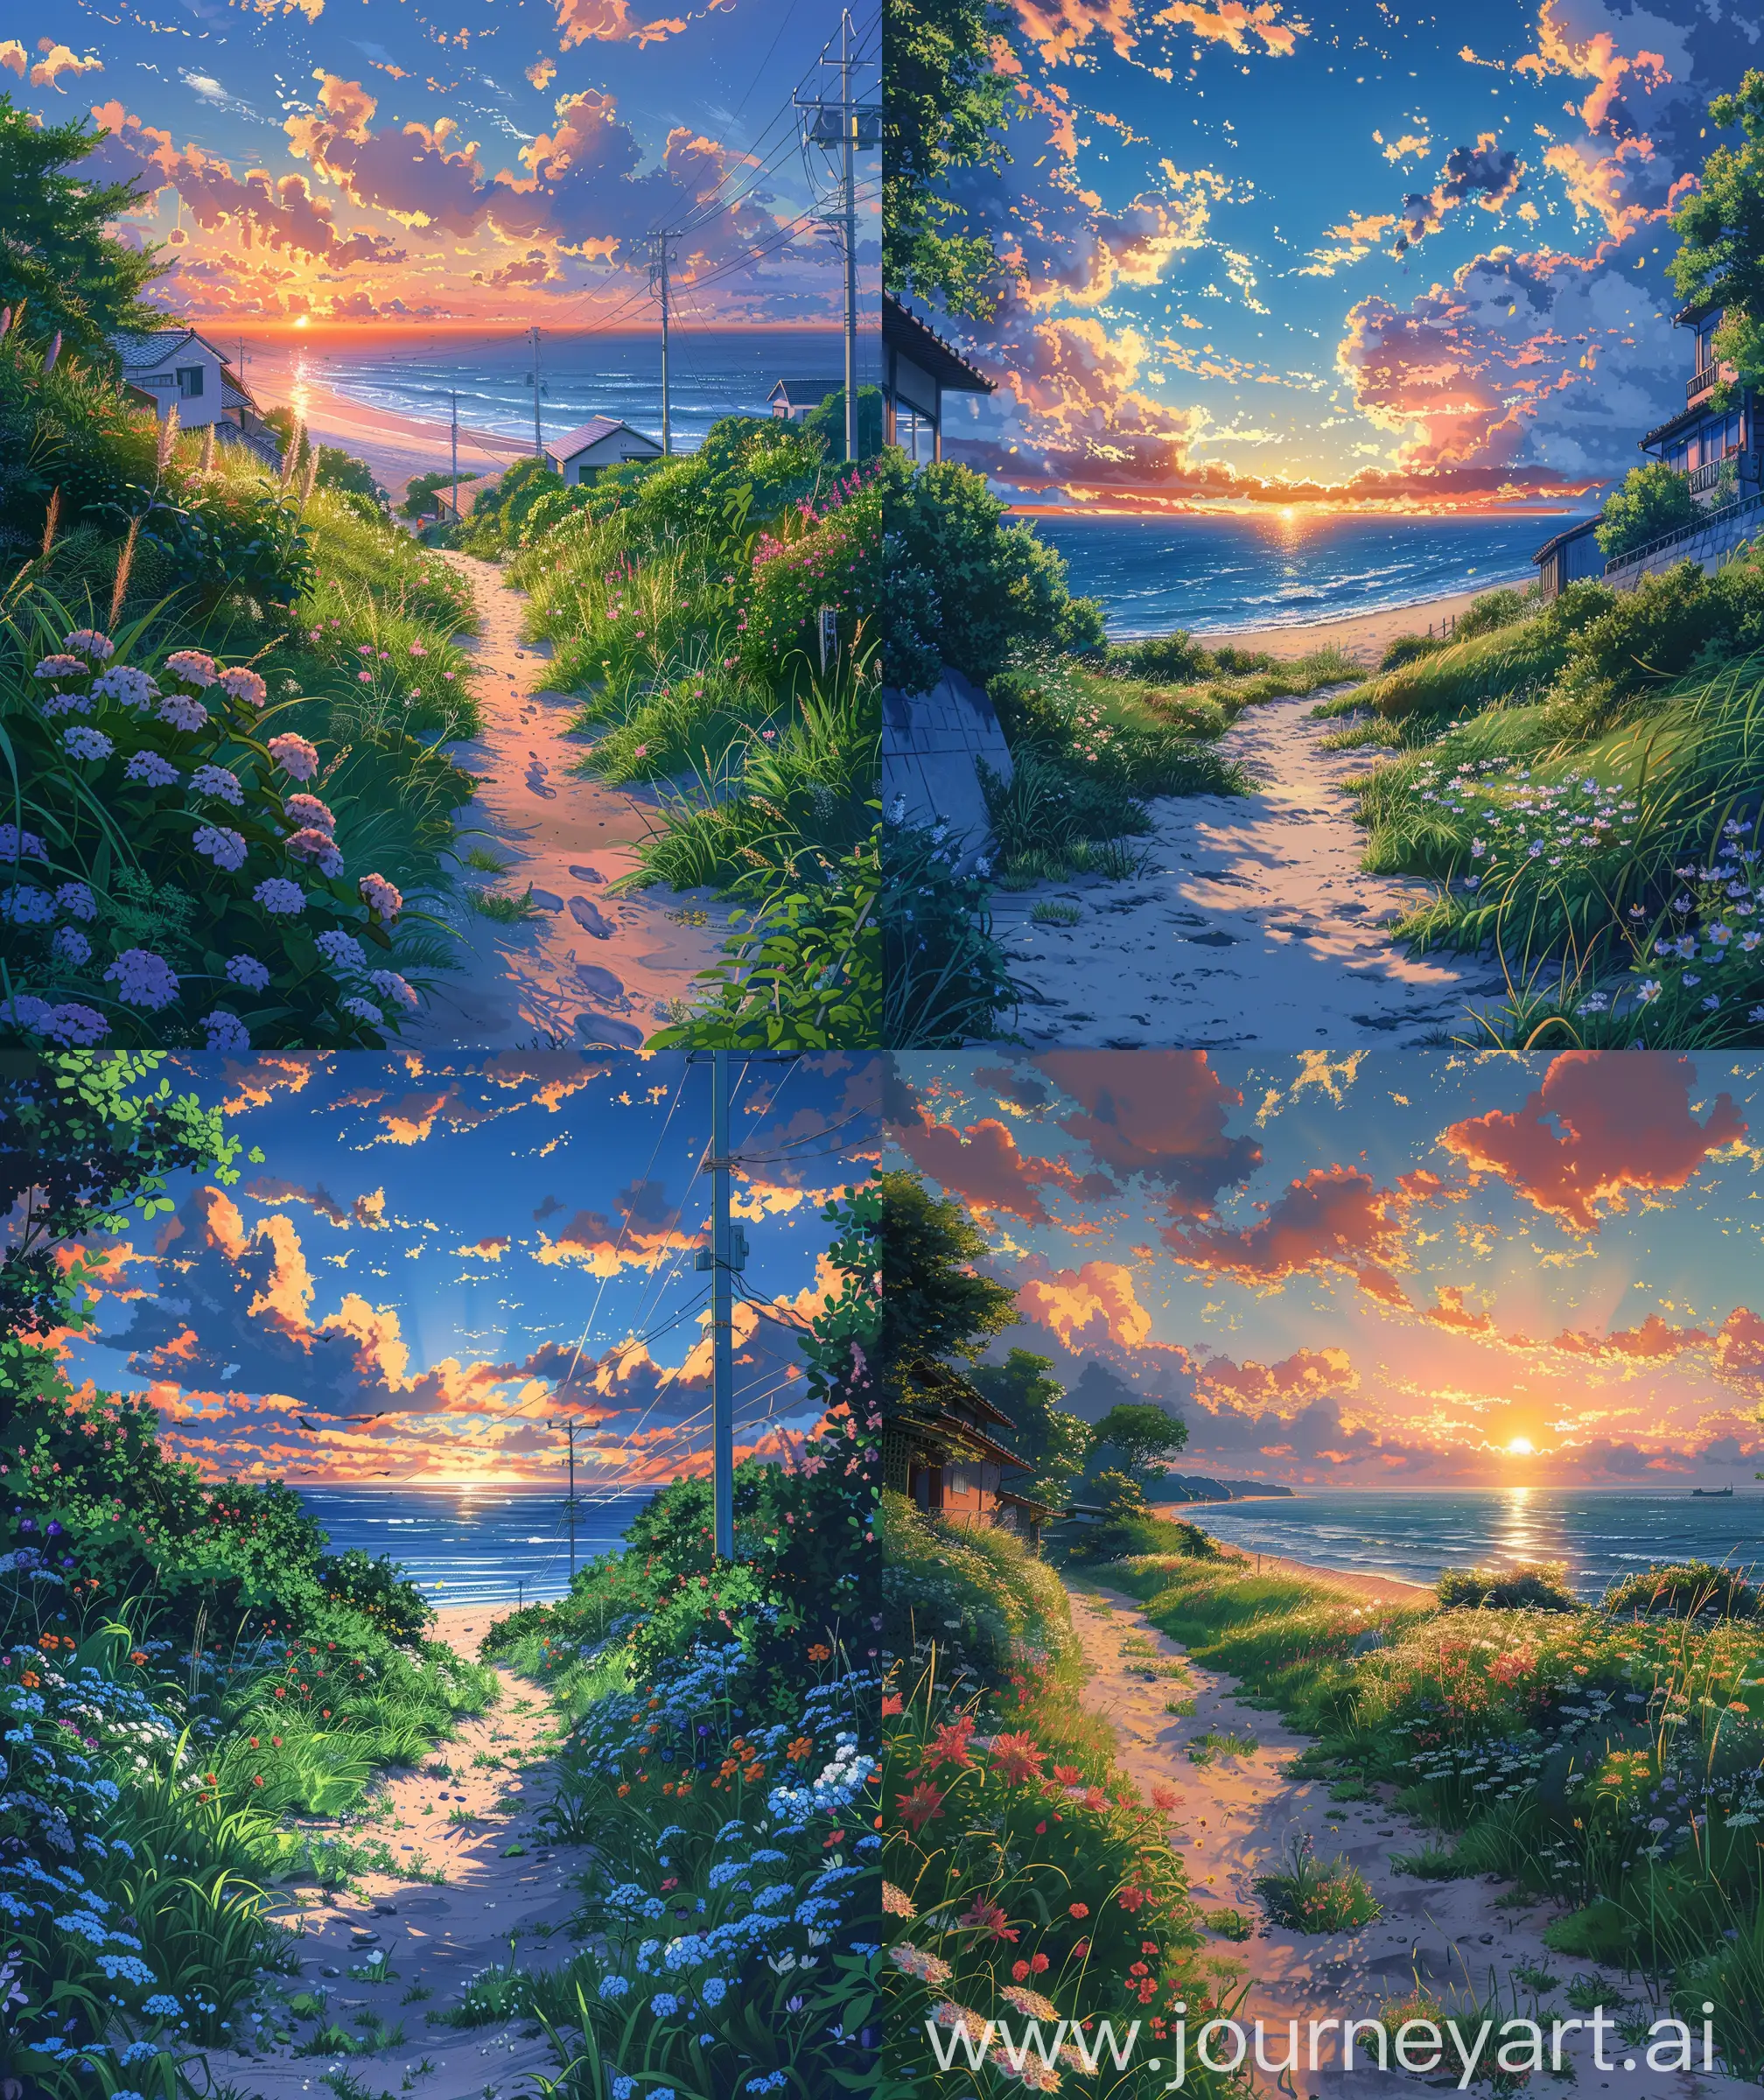 Beautiful anime scenary, mokoto shinkai and Ghibli style mix, direct front facade verious view of seaside, grass and sandy road, grass showing, street, flowers, bushes, sunrise sky", close up, vibrant look, beautiful sky, illustration, anime scenes, ultra HD, high quality, sharp details, no hyperrealistic --ar 27:32 --s 400